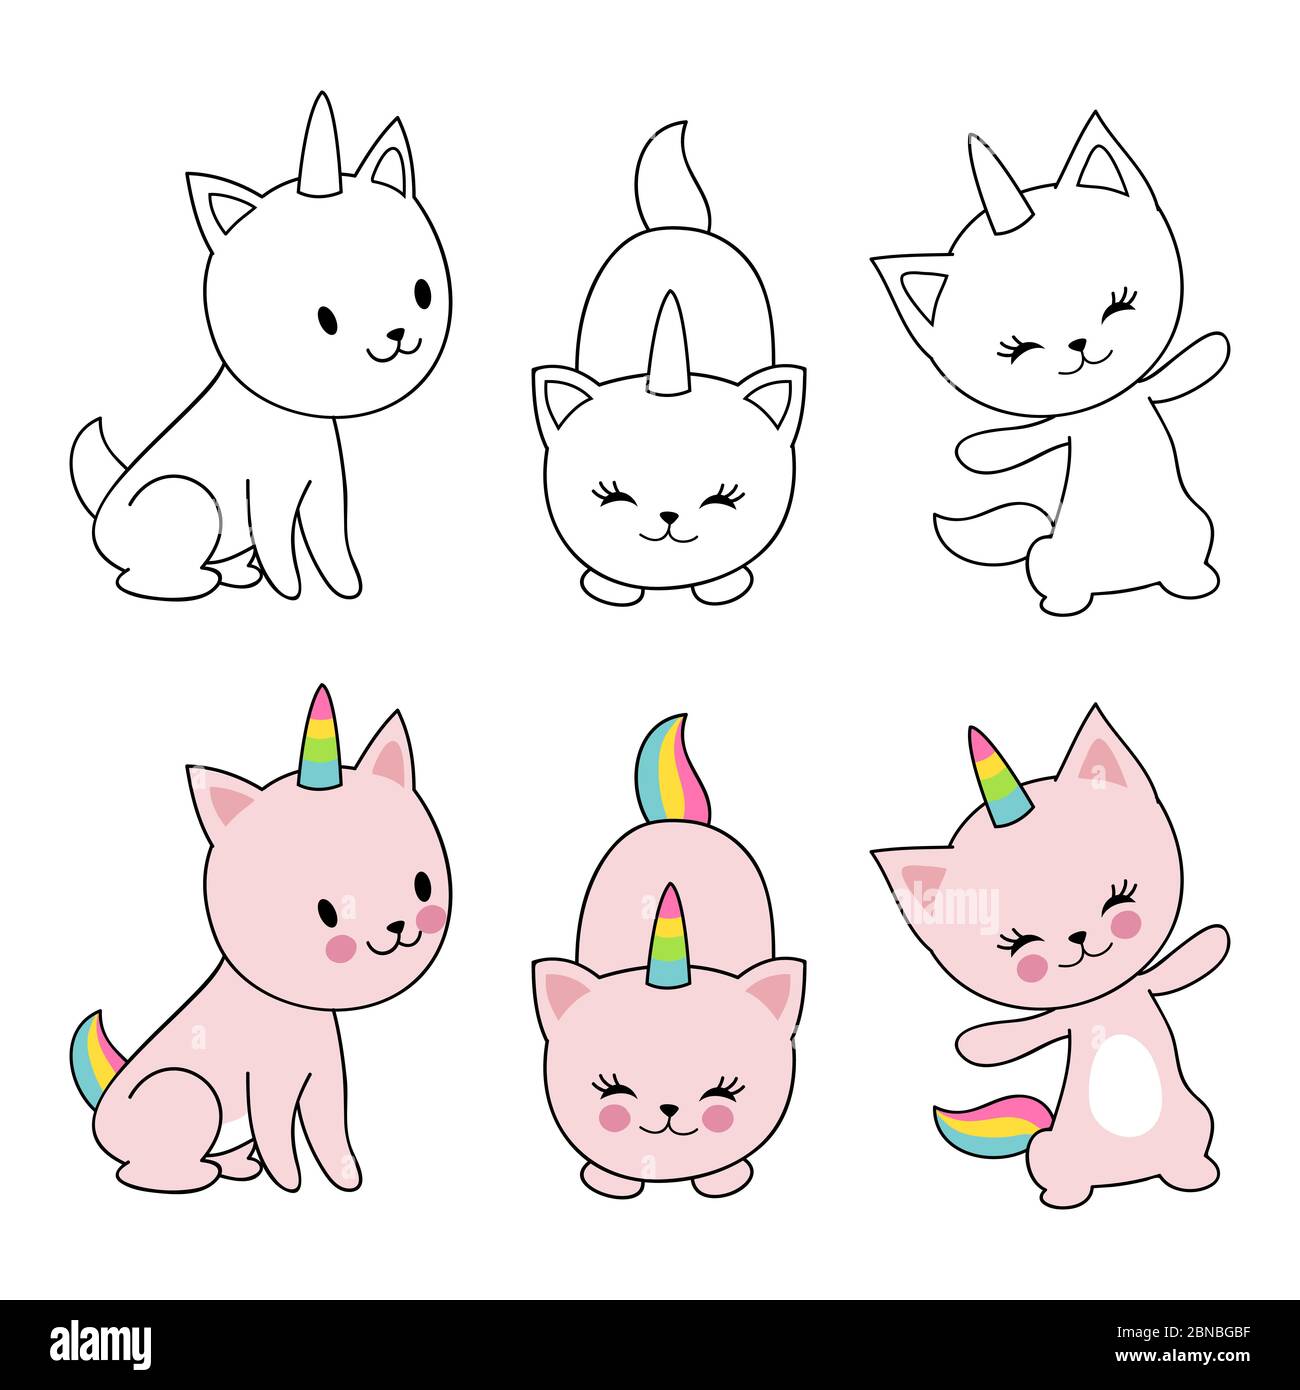 Cartoon character cats unicorn isolaten on white background. Kids coloring with cute kittens. Vector unicorn cat, funny animal character illustration Stock Vector